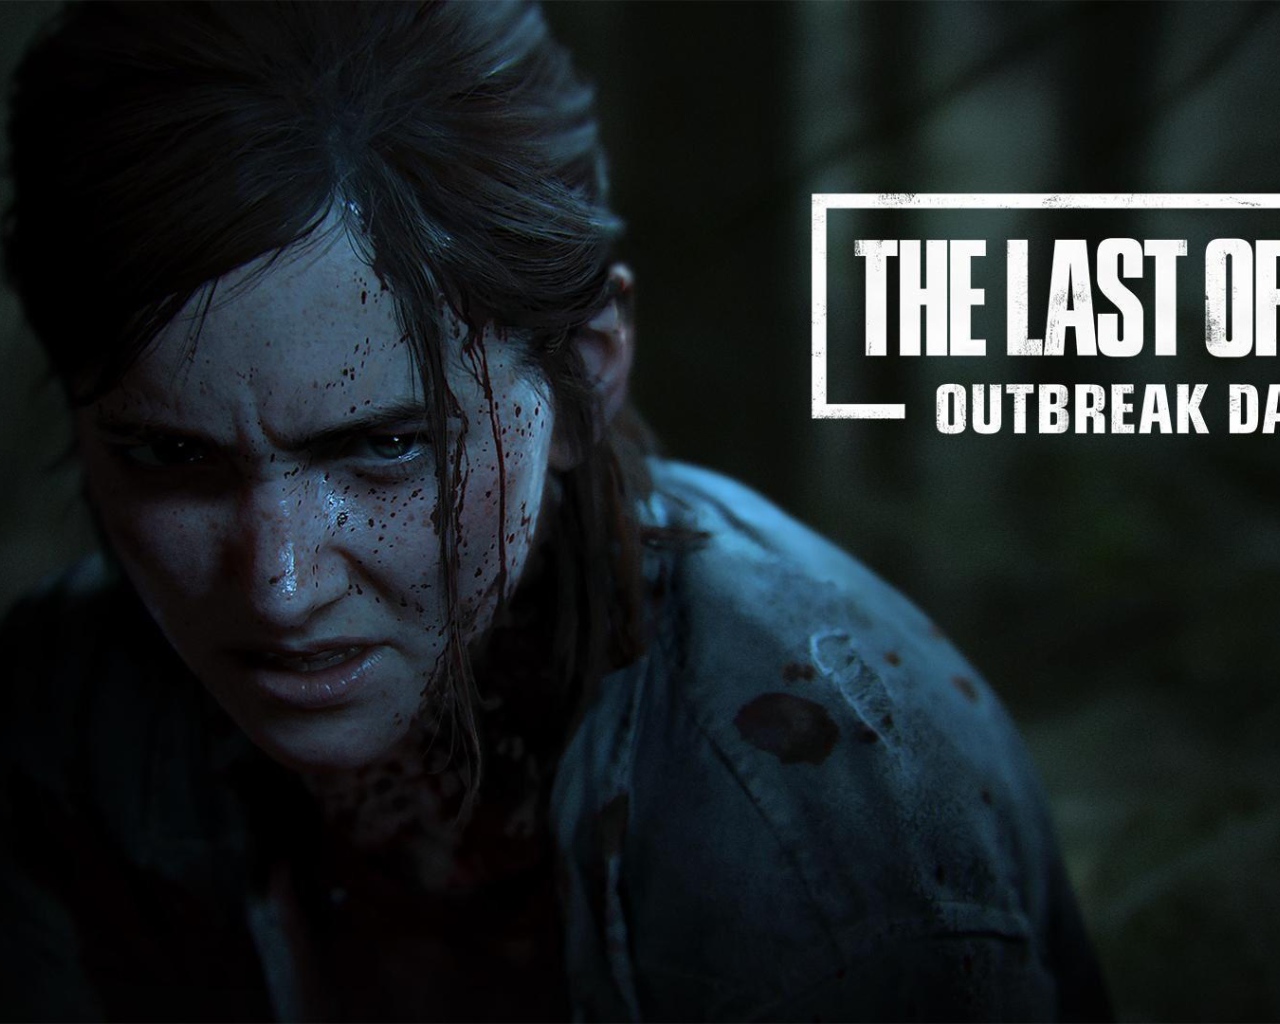 Poster for the new computer game The Last of Us Part II, 2020